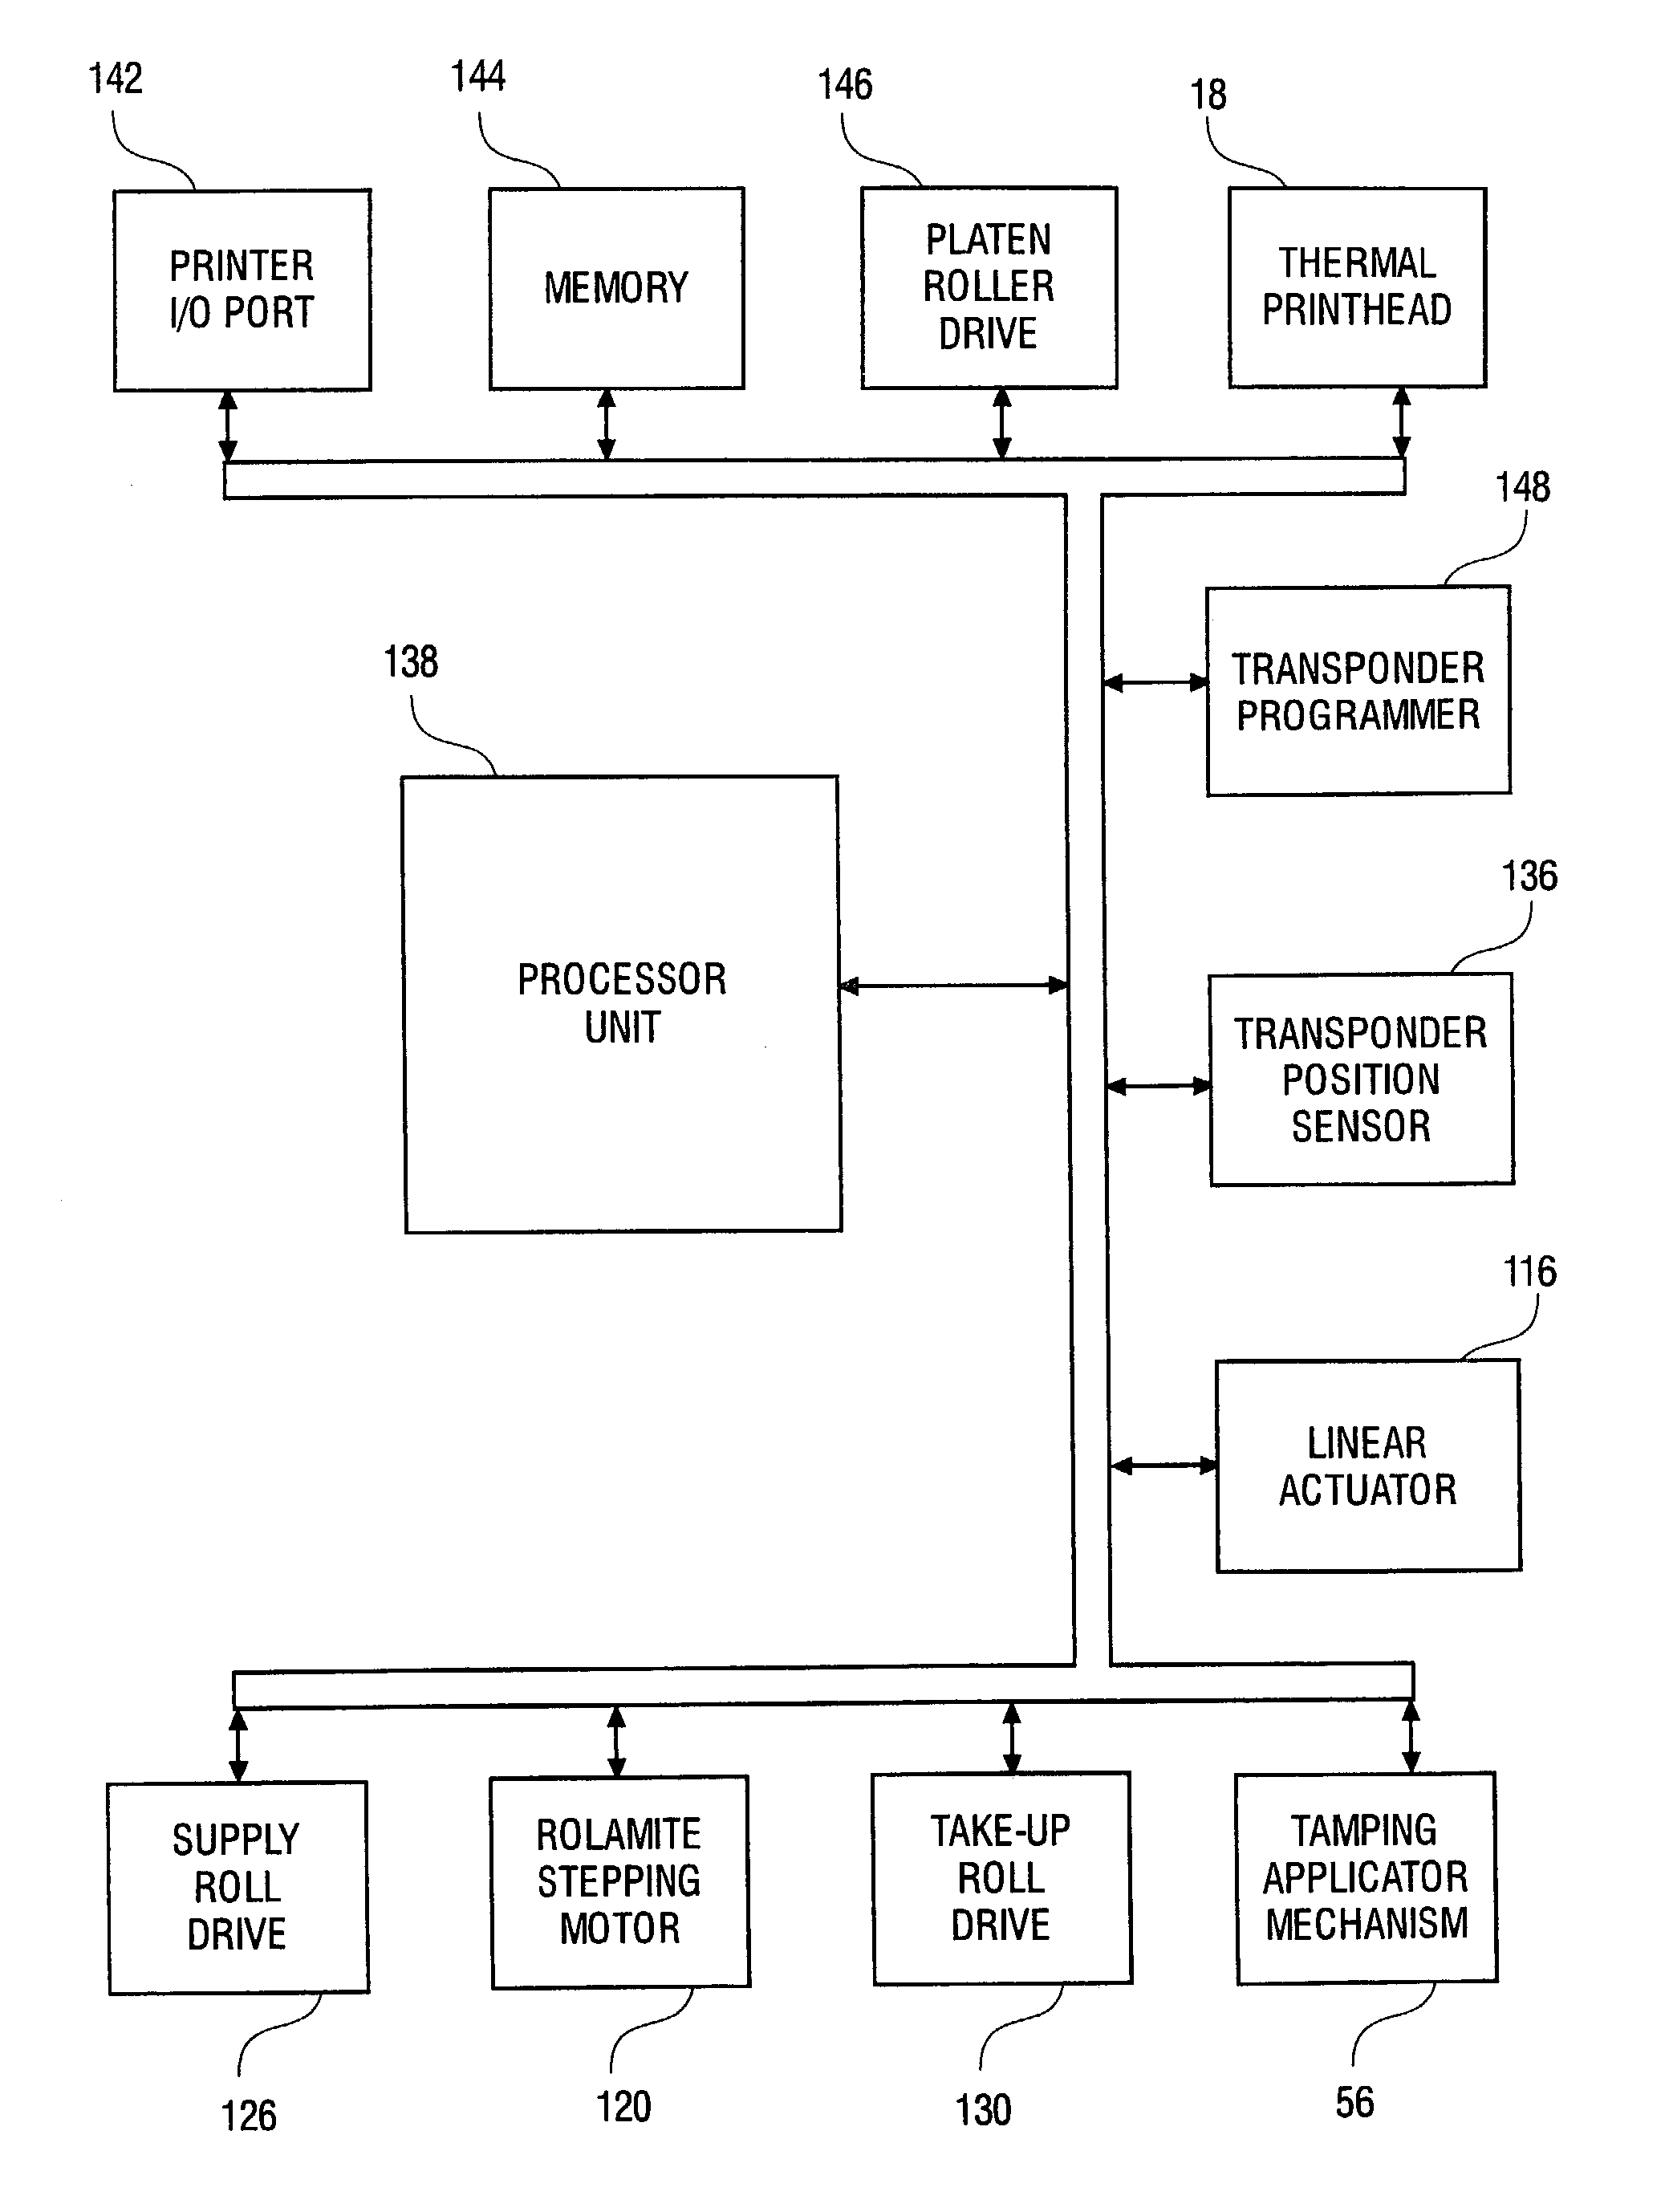 Printer or other media processor with on-demand selective media converter